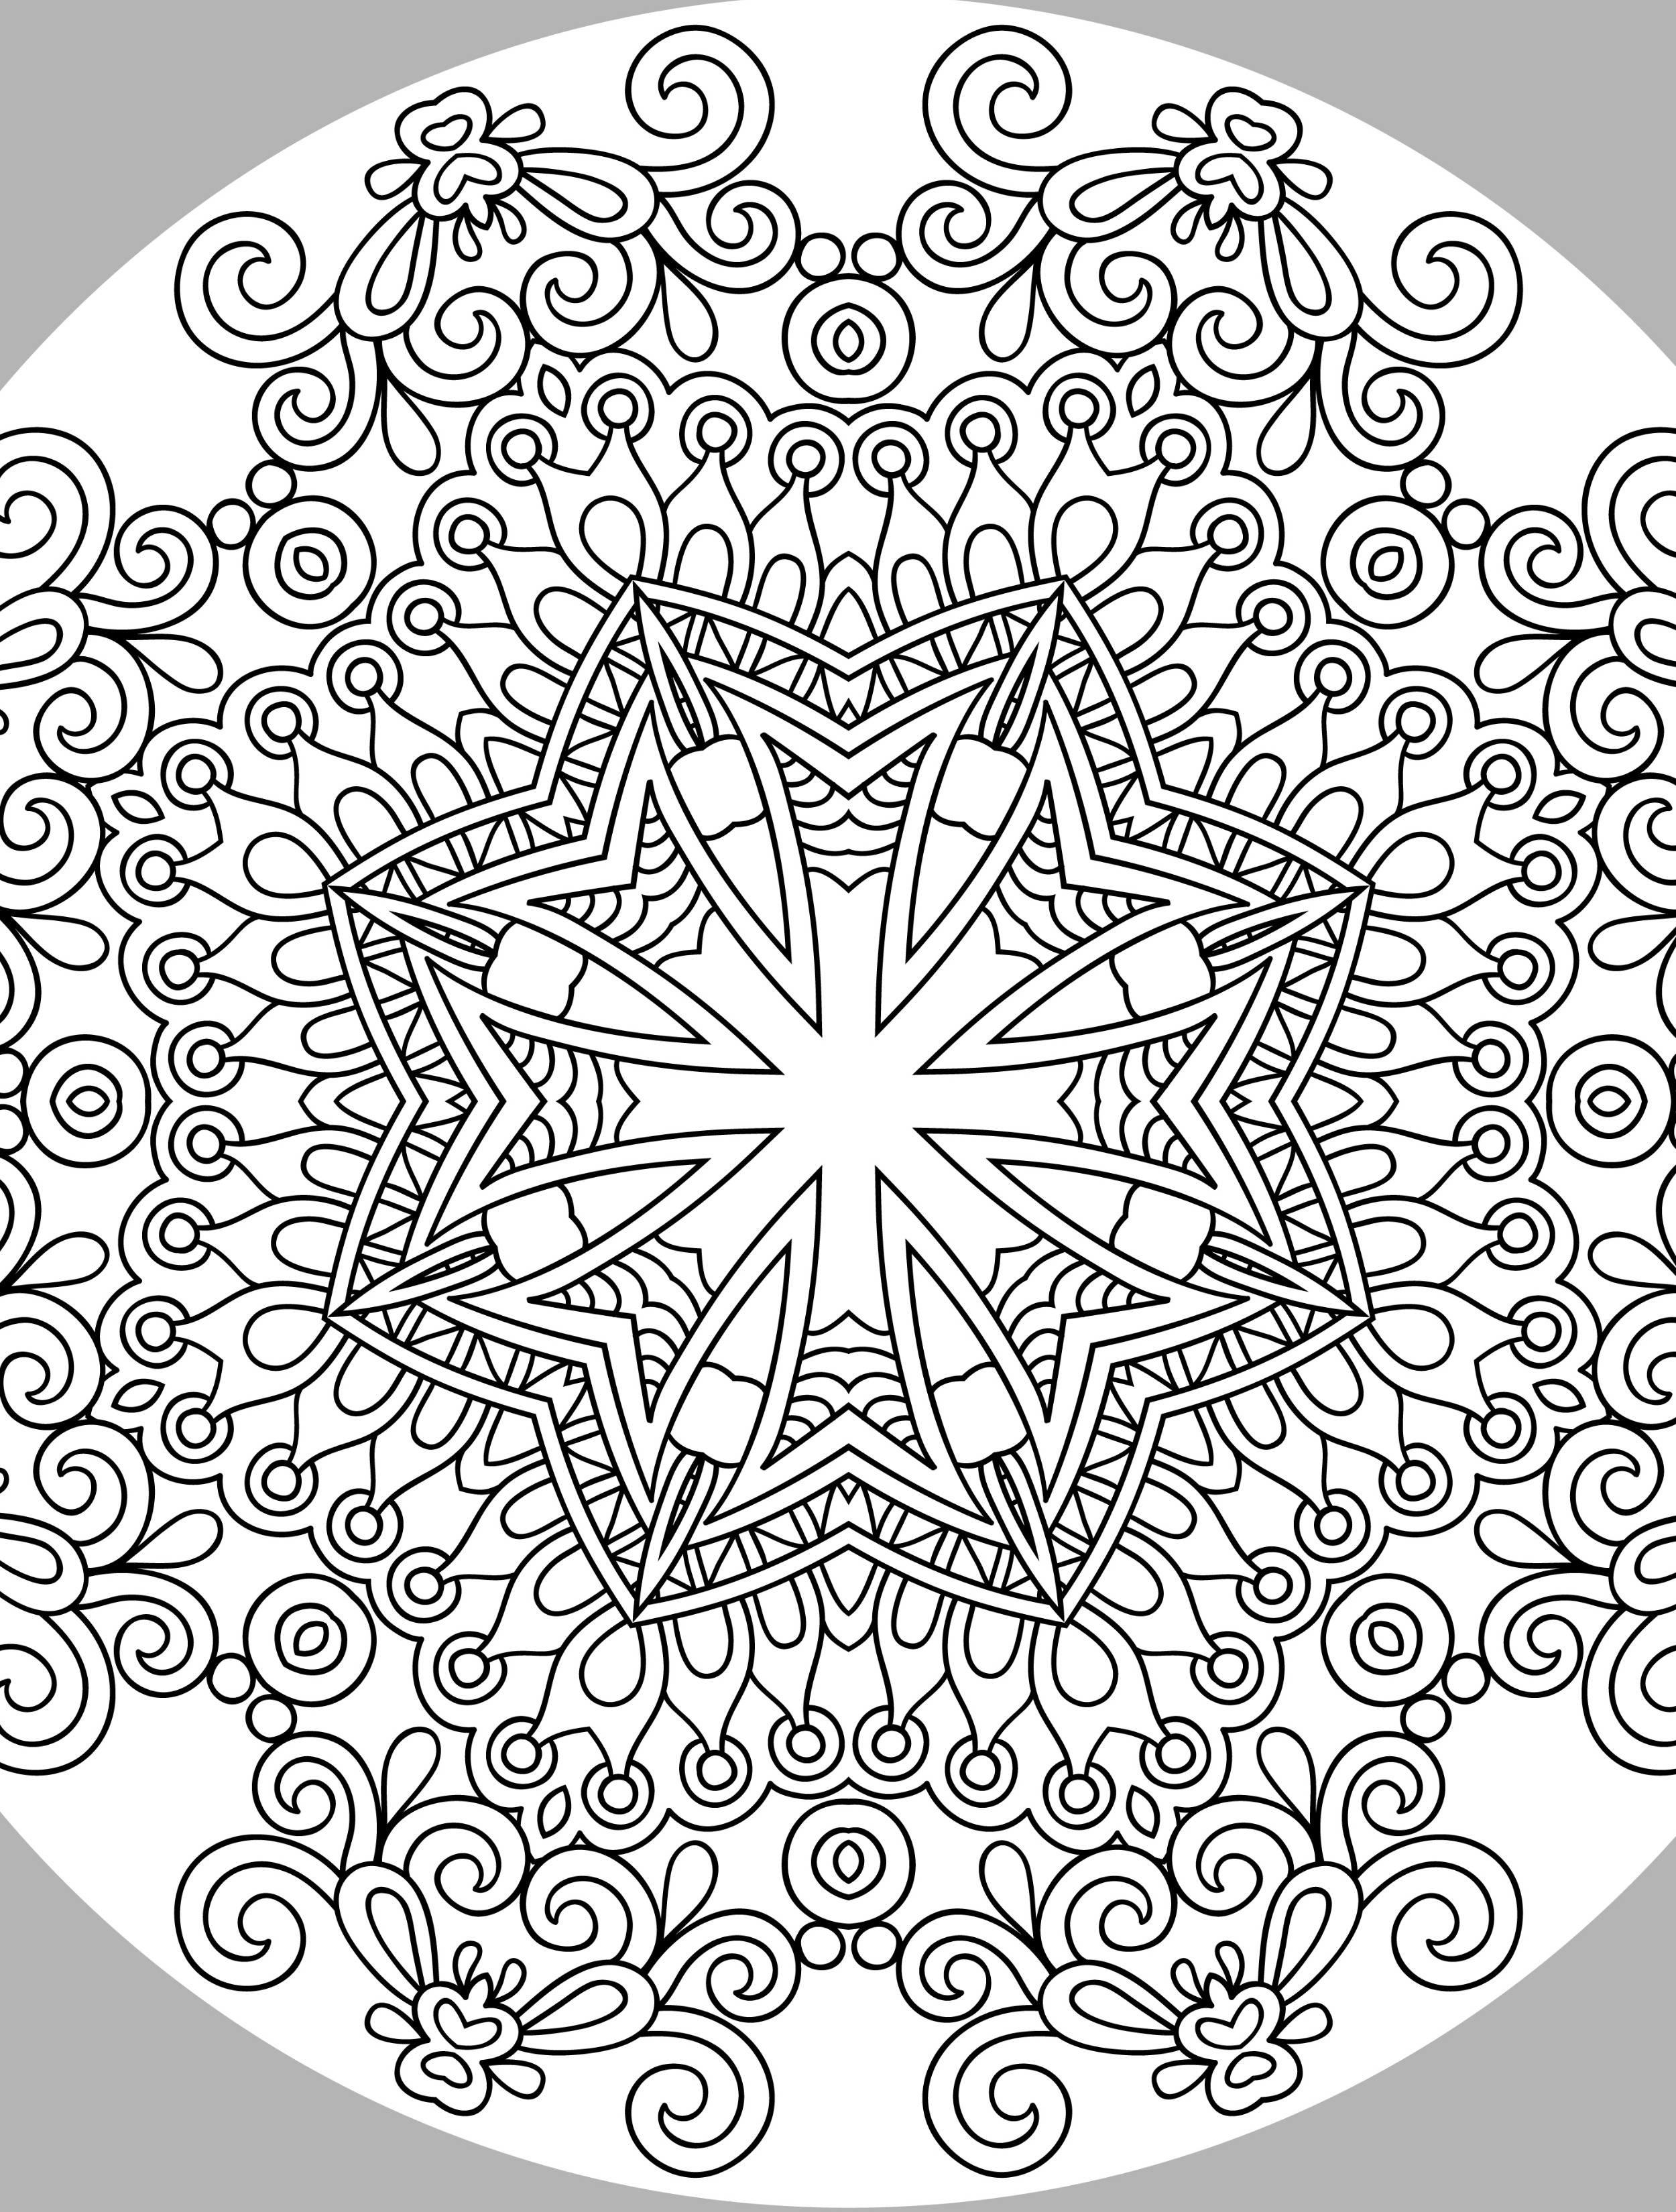 Free Stress Relief Coloring Pages at GetDrawings | Free download